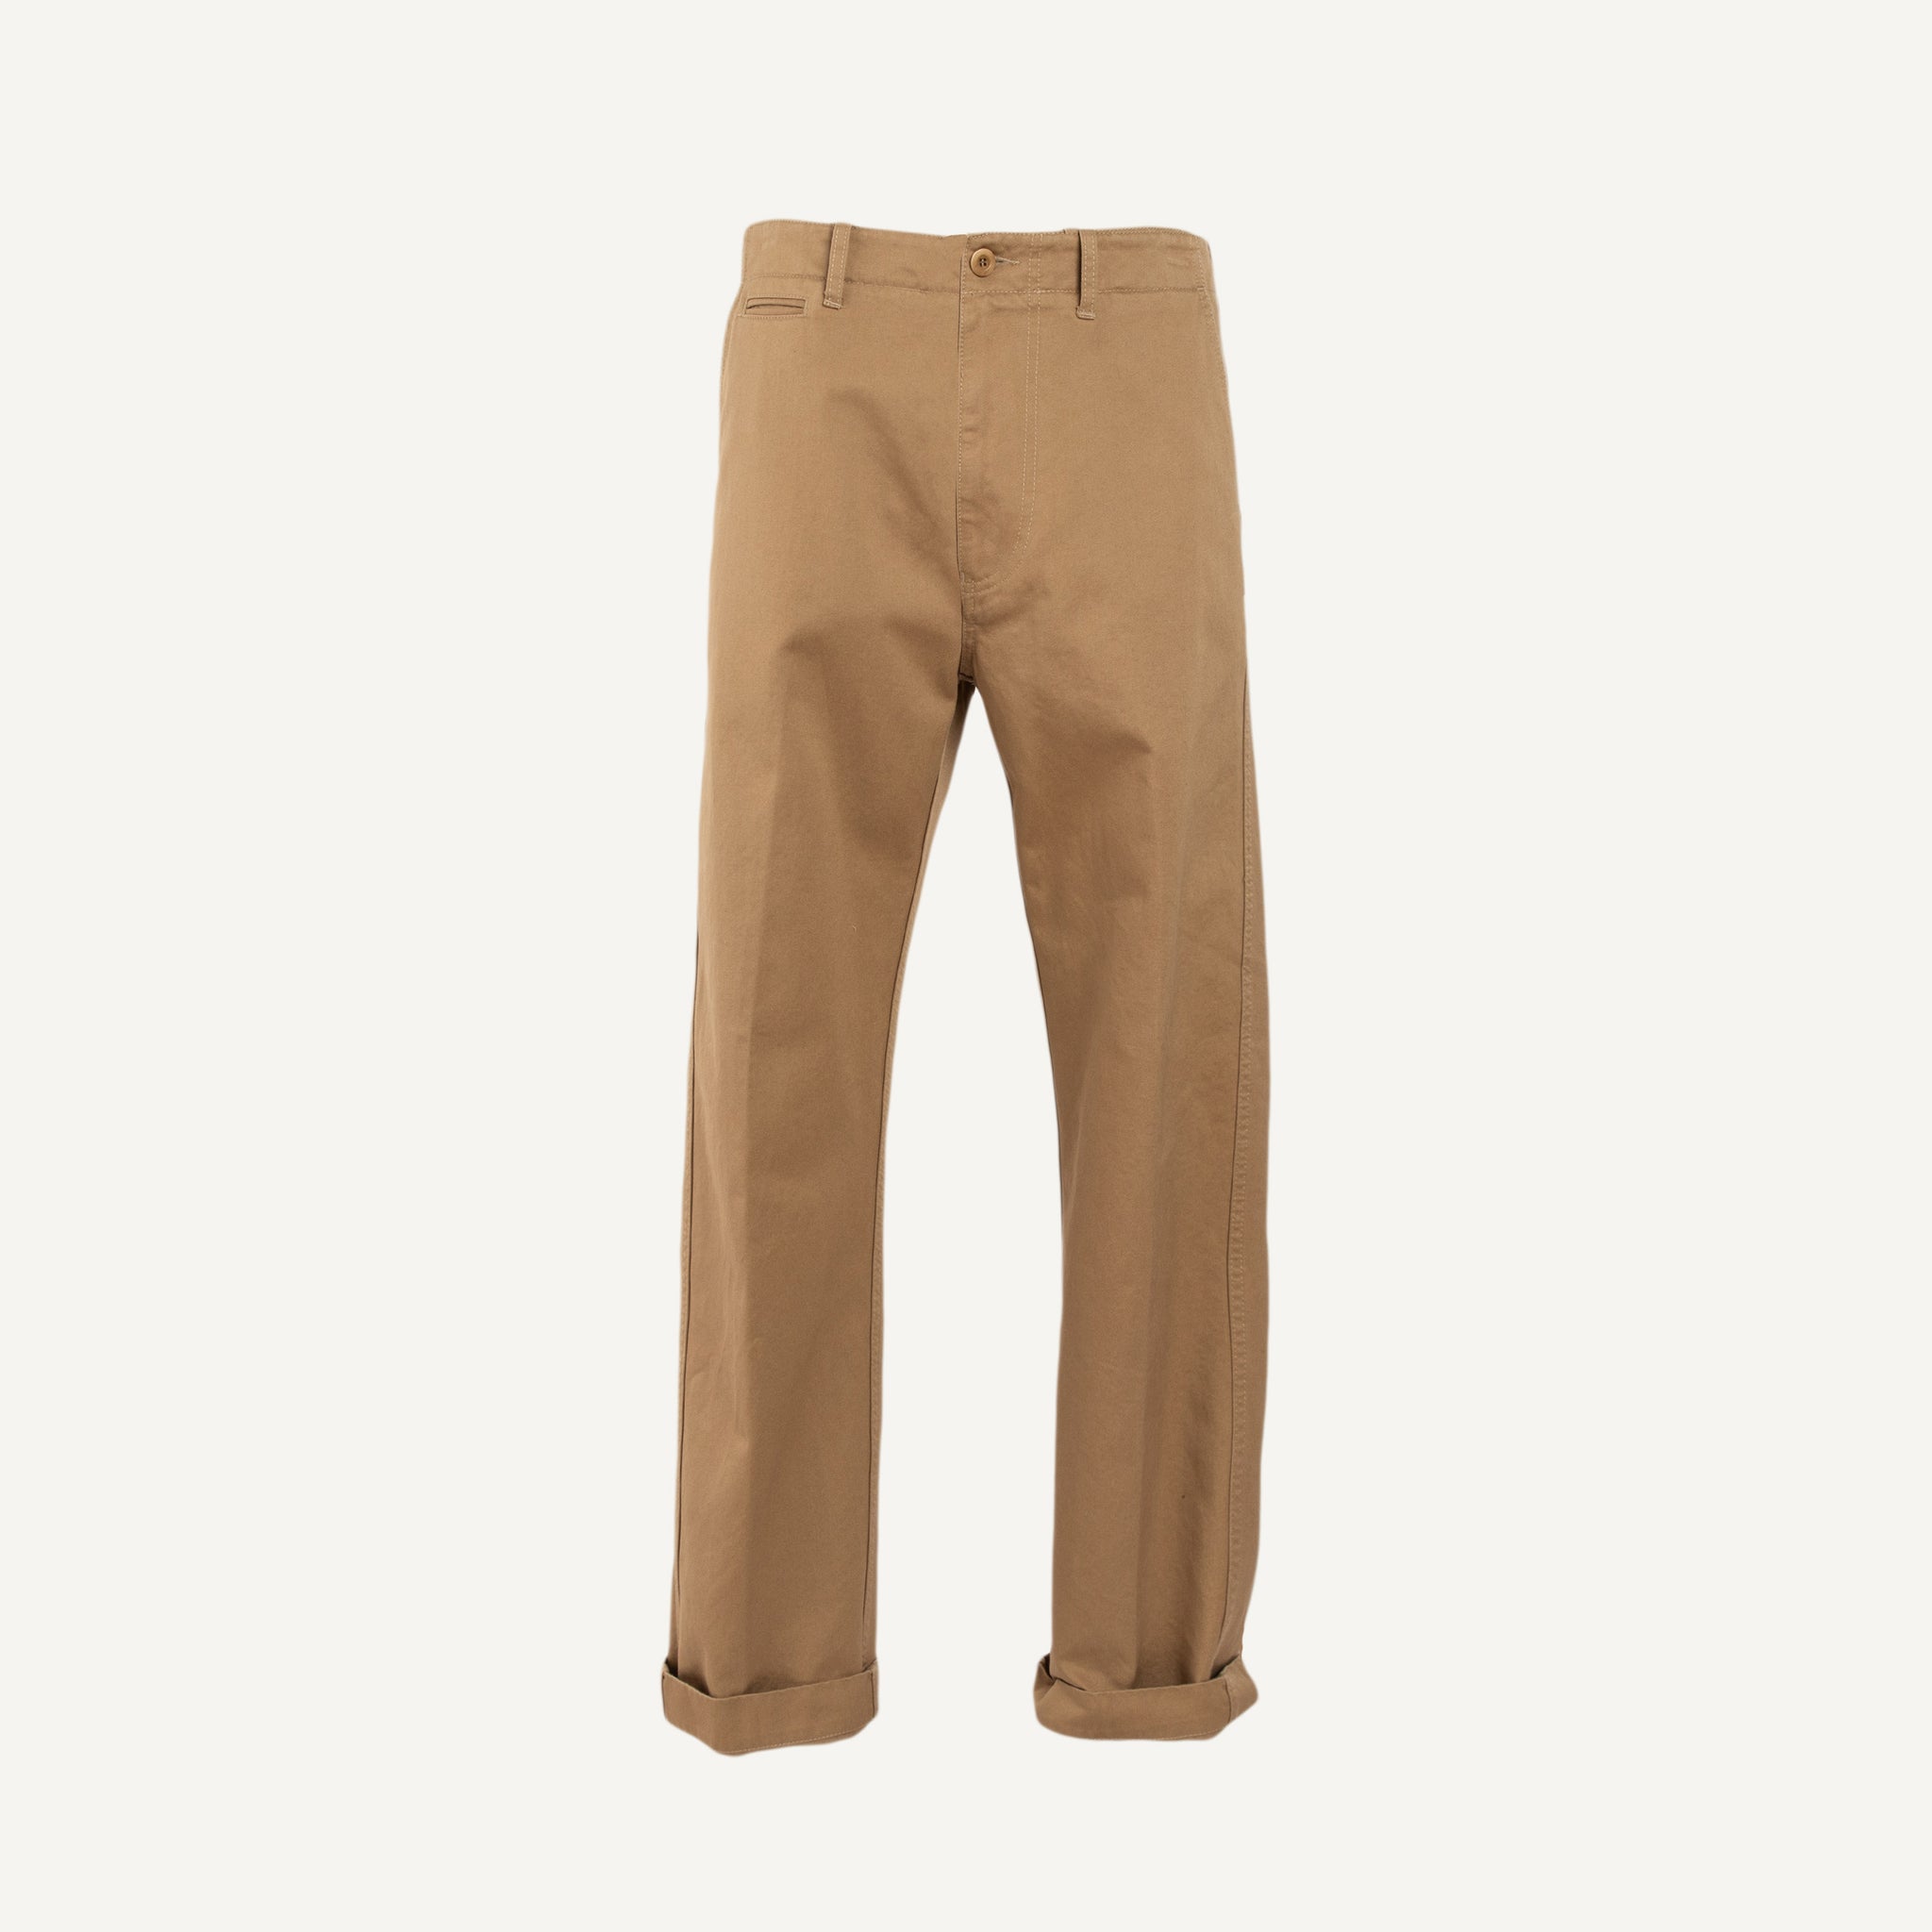 EAST HARBOUR SURPLUS TWILL CHINOS